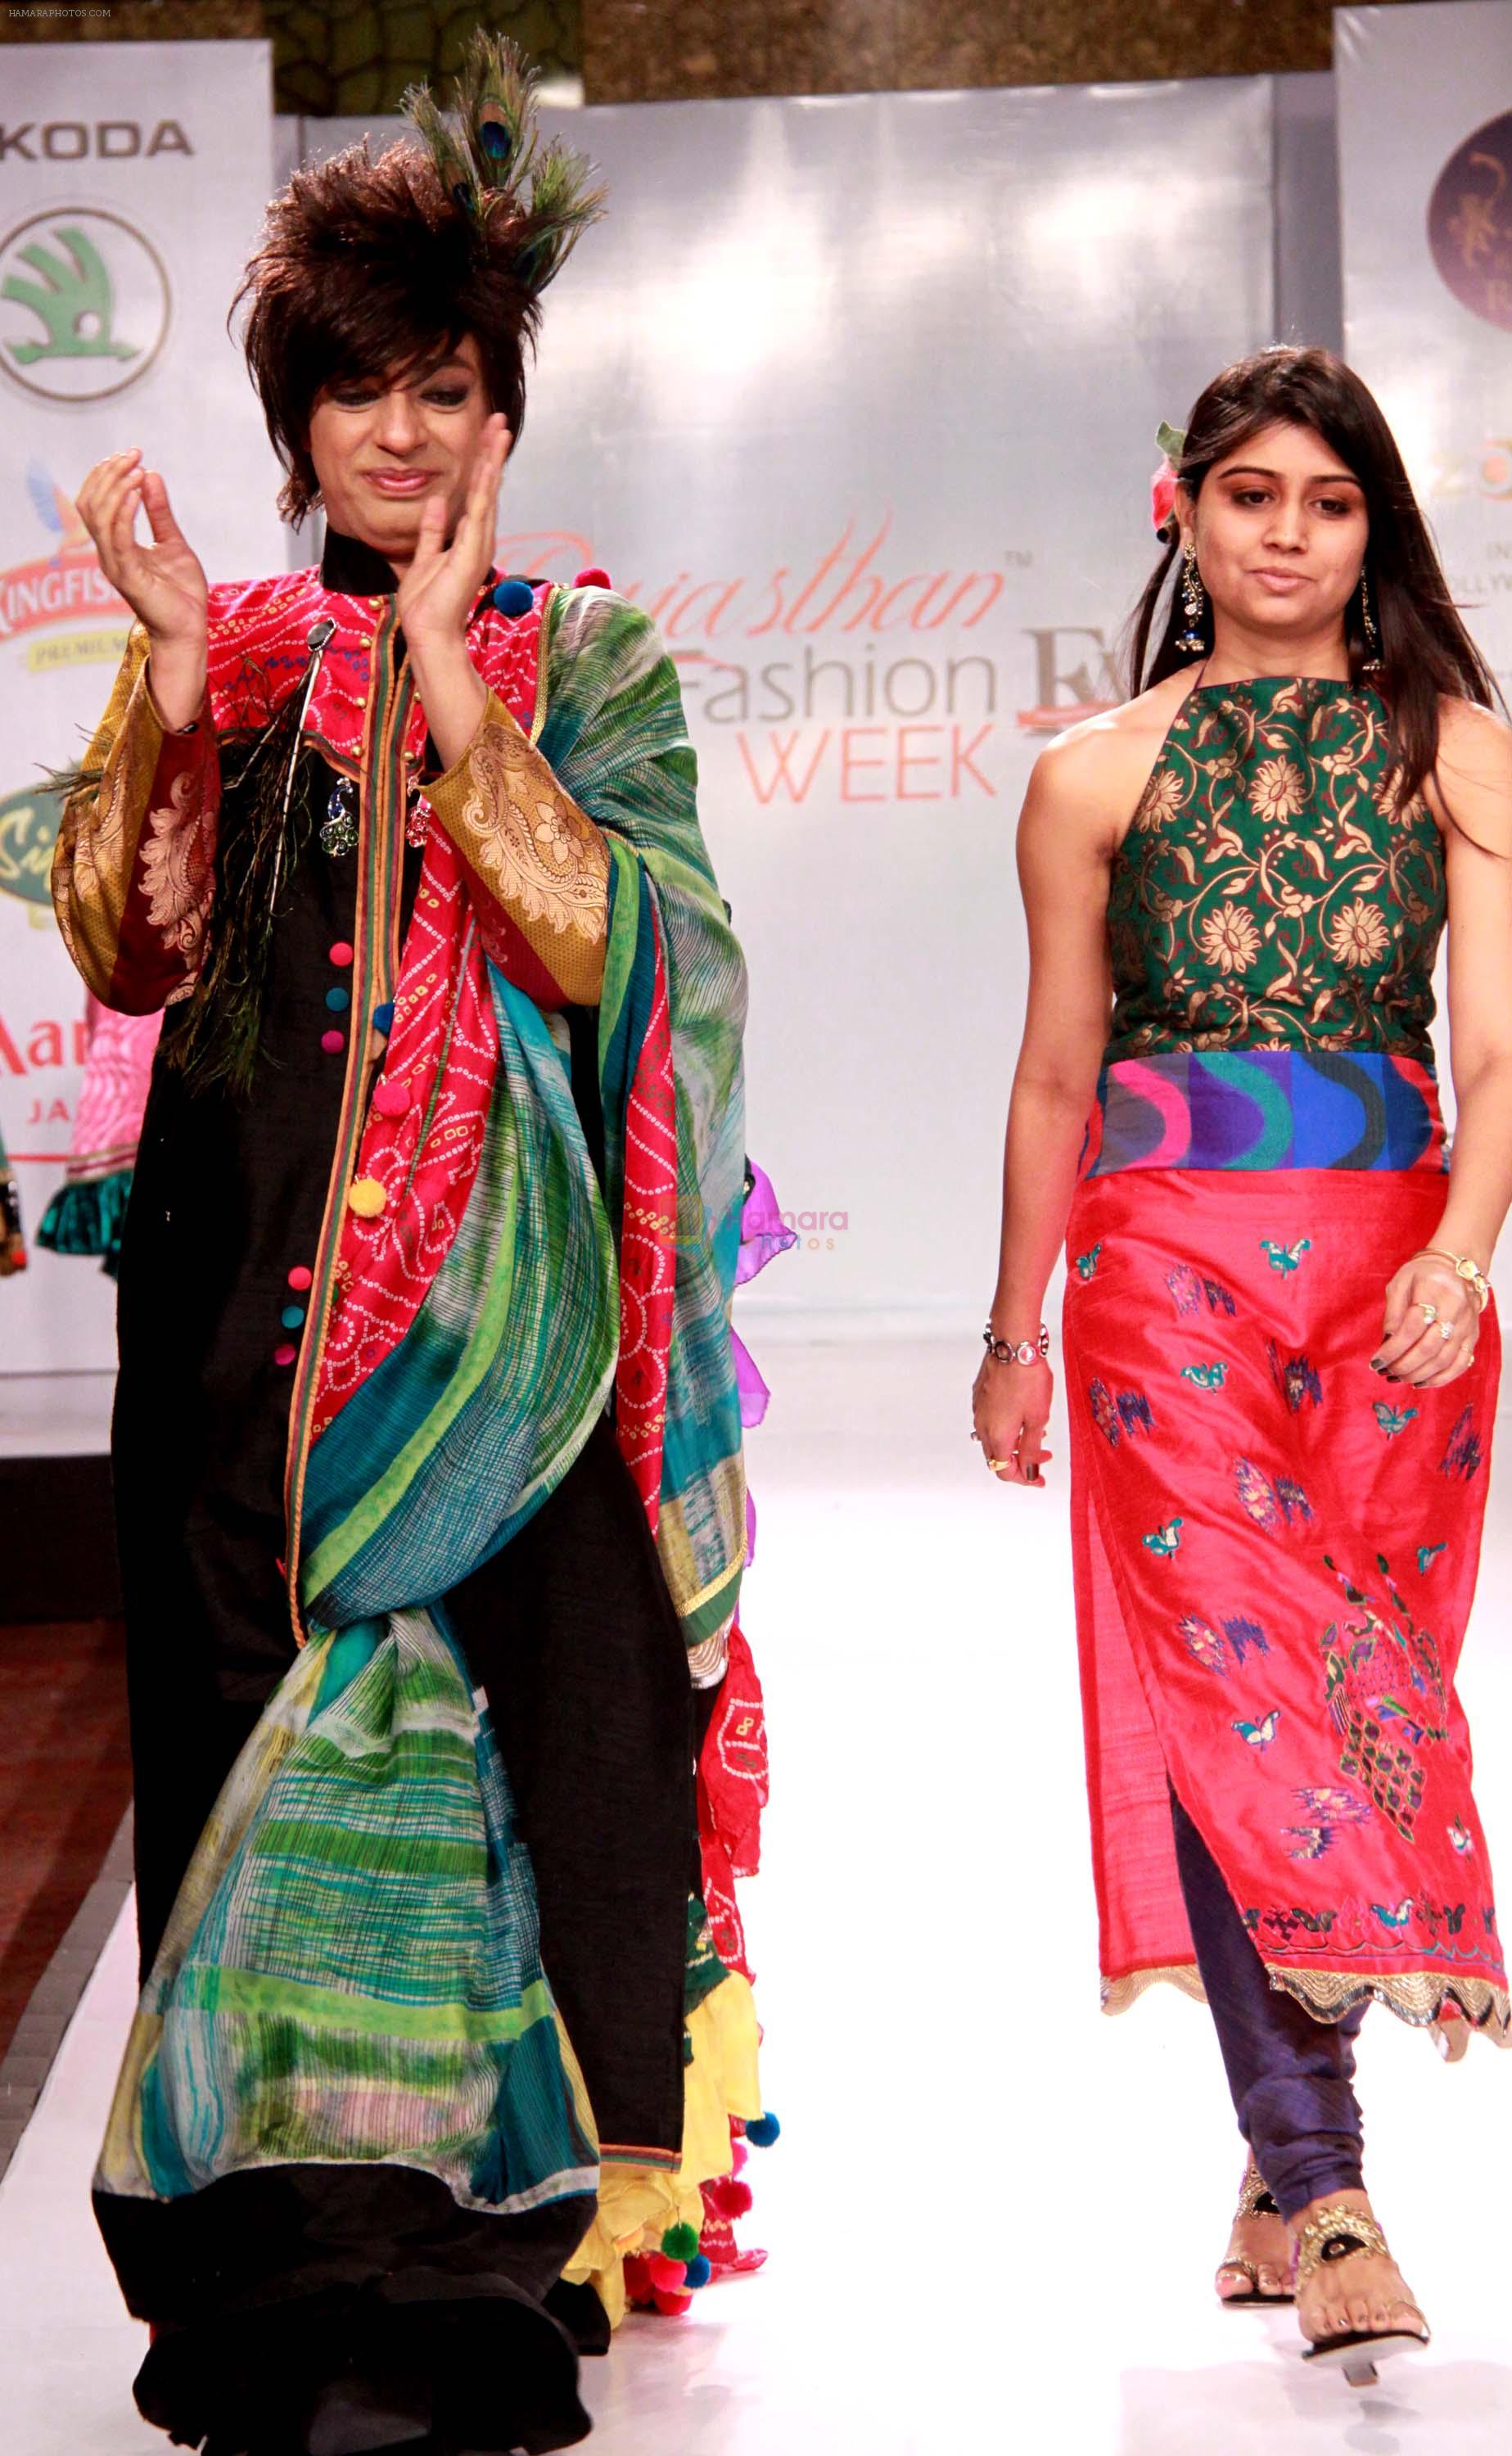 rohit verma & poonam patel on second day of Rajasthan Fashion Week at Jaipur Marriott on 25th May 2012